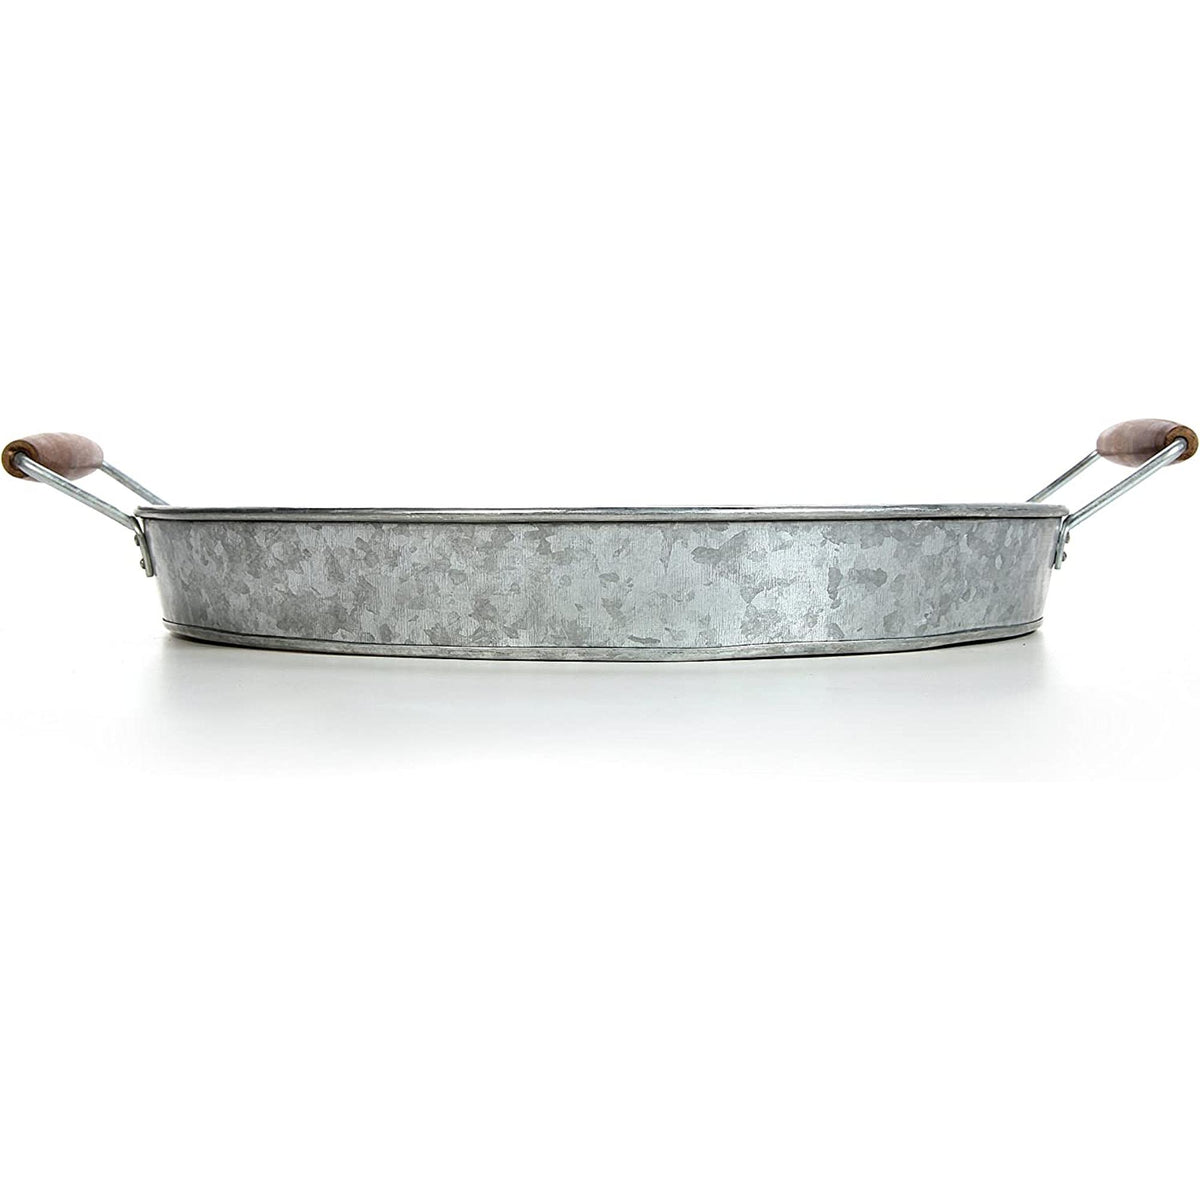 HOSLEY® Iron Galvanized Tray with Wooden Handles, 16 inches Diameter (handle to handle 19.69 inches)